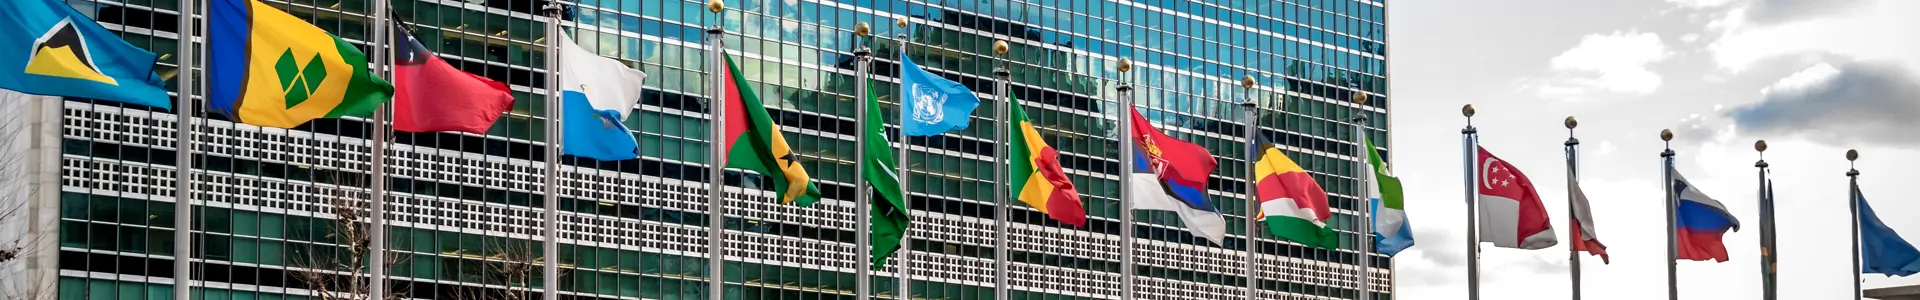 You can see several flags in front of the UN Headquarters in New York.